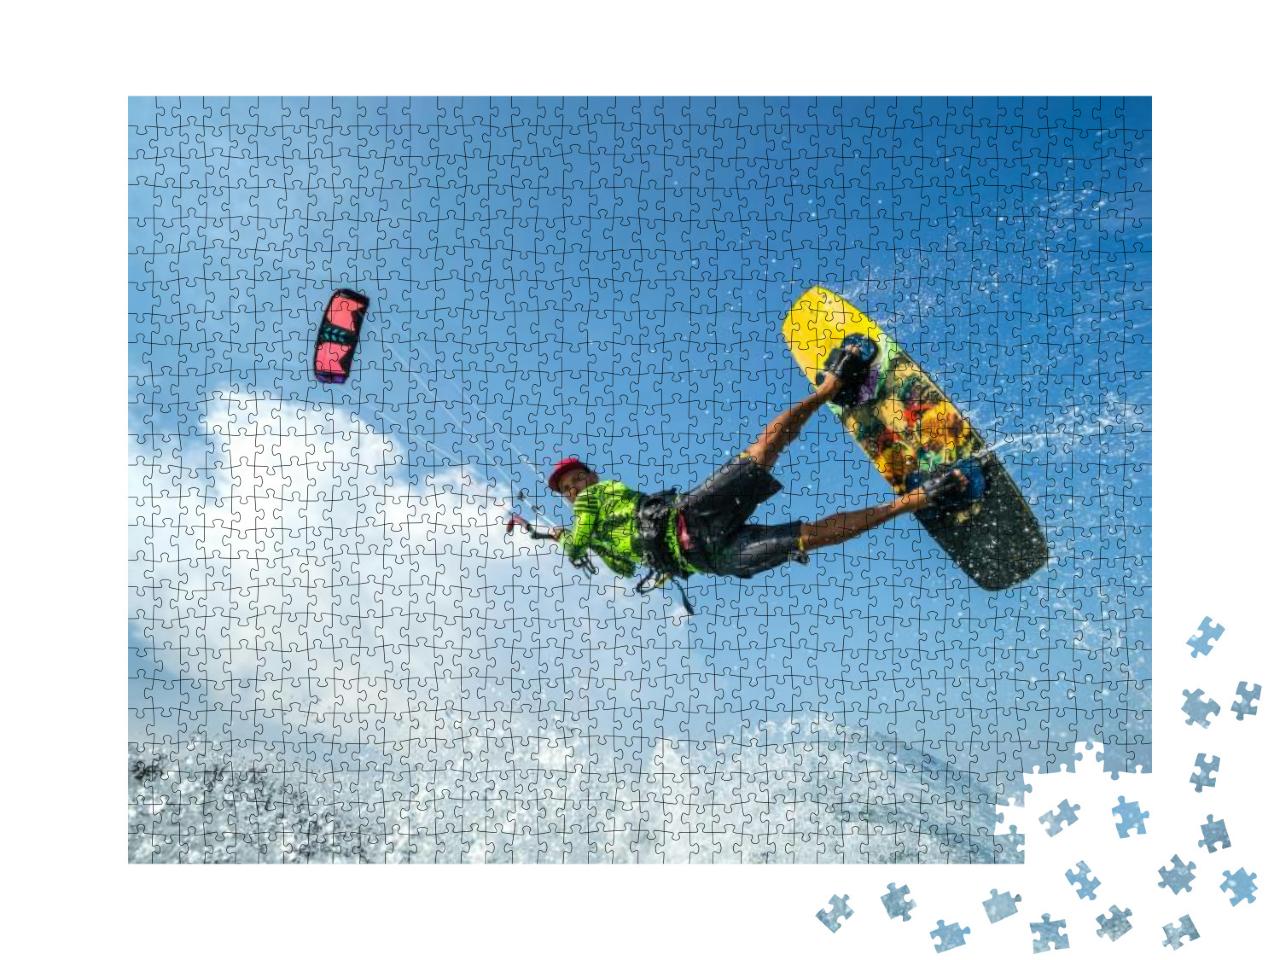 A Kite Surfer Rides the Waves... Jigsaw Puzzle with 1000 pieces